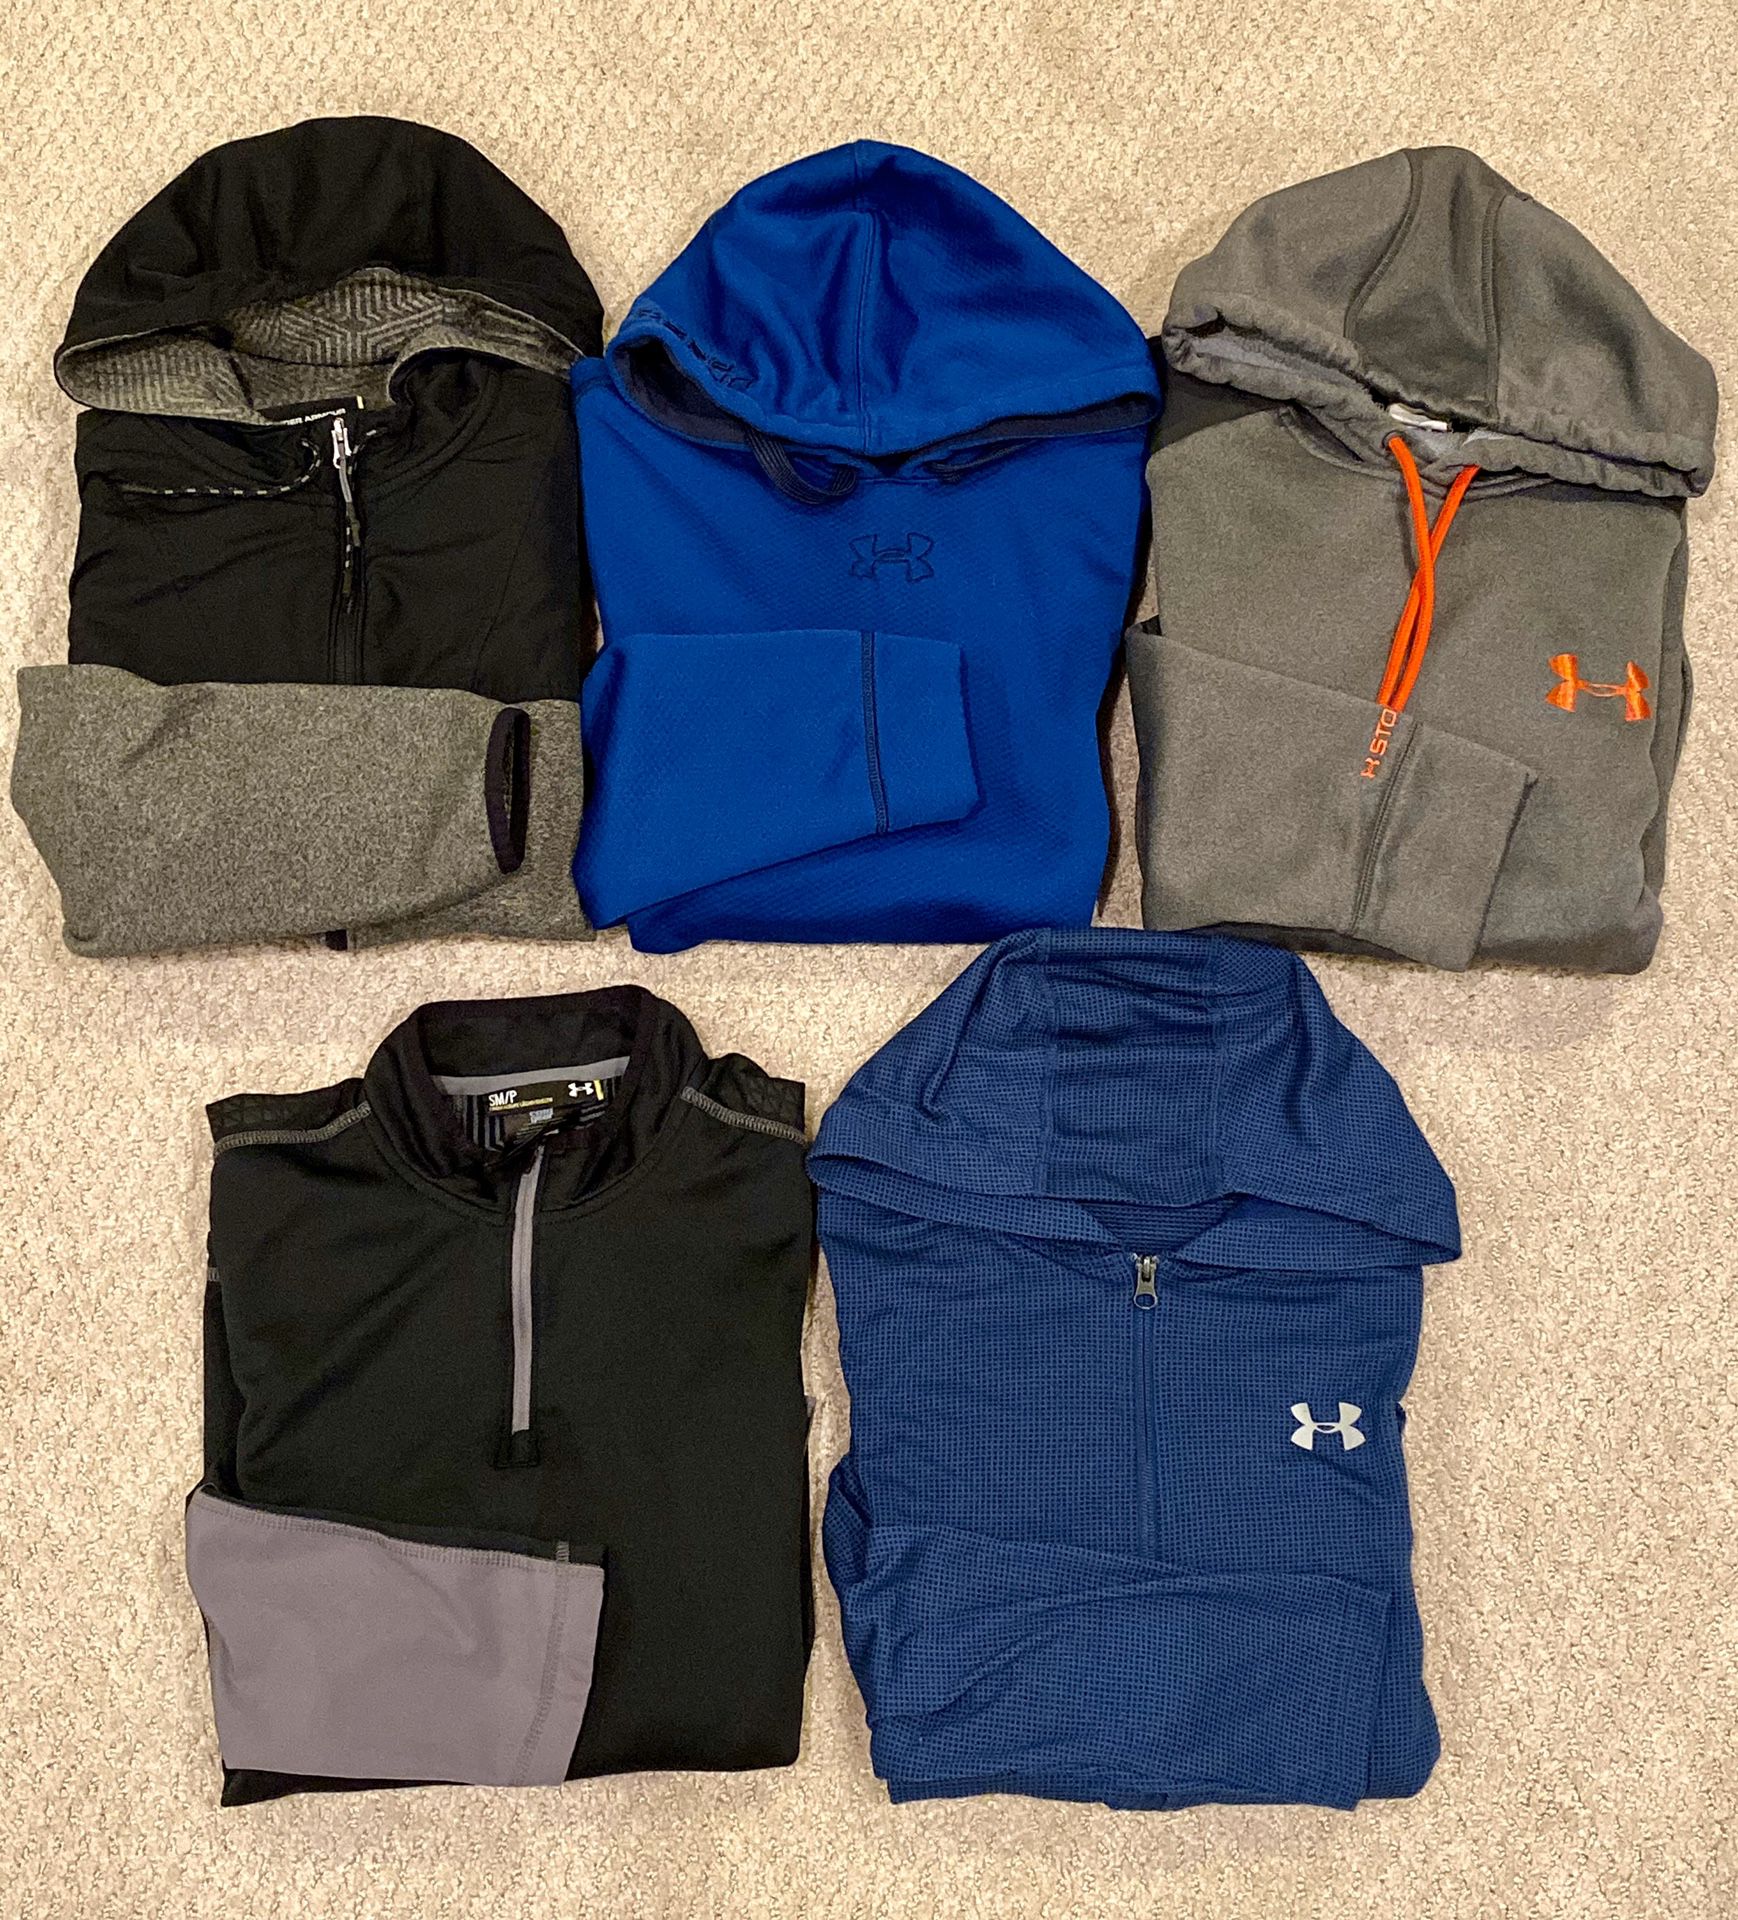 Under Armour Men’s Longsleeves Active Wear Size S/M Lot of 5